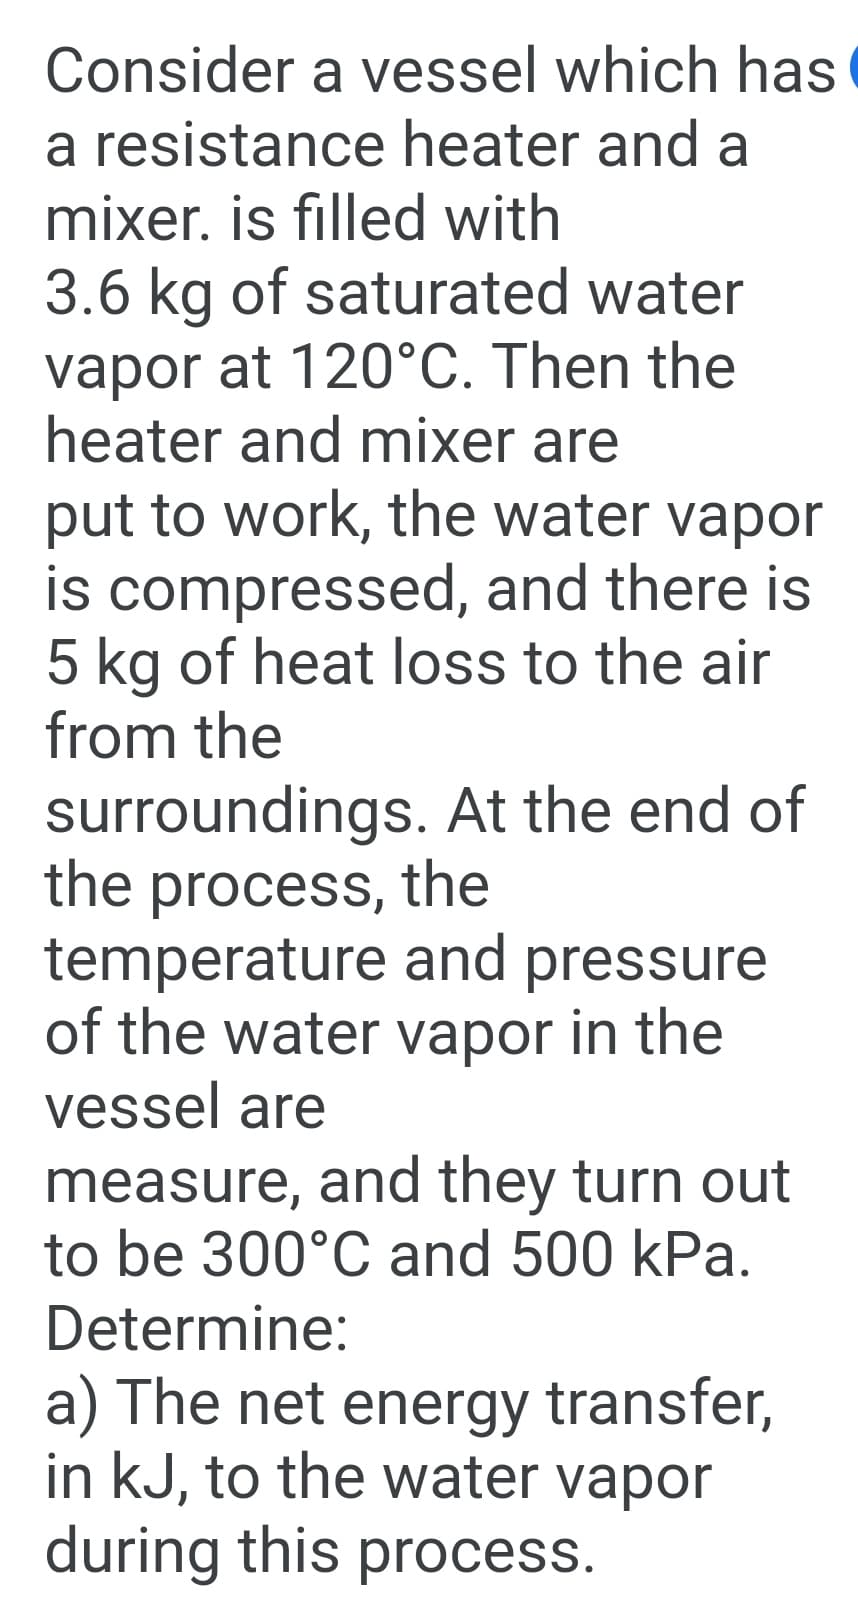 Consider a vessel which has
a resistance heater and a
mixer. is filled with
3.6 kg of saturated water
vapor at 120°C. Then the
heater and mixer are
put to work, the water vapor
is compressed, and there is
5 kg of heat loss to the air
from the
surroundings. At the end of
the process, the
temperature and pressure
of the water vapor in the
vessel are
measure, and they turn out
to be 300°C and 500 kPa.
Determine:
a) The net energy transfer,
in kJ, to the water vapor
during this process.